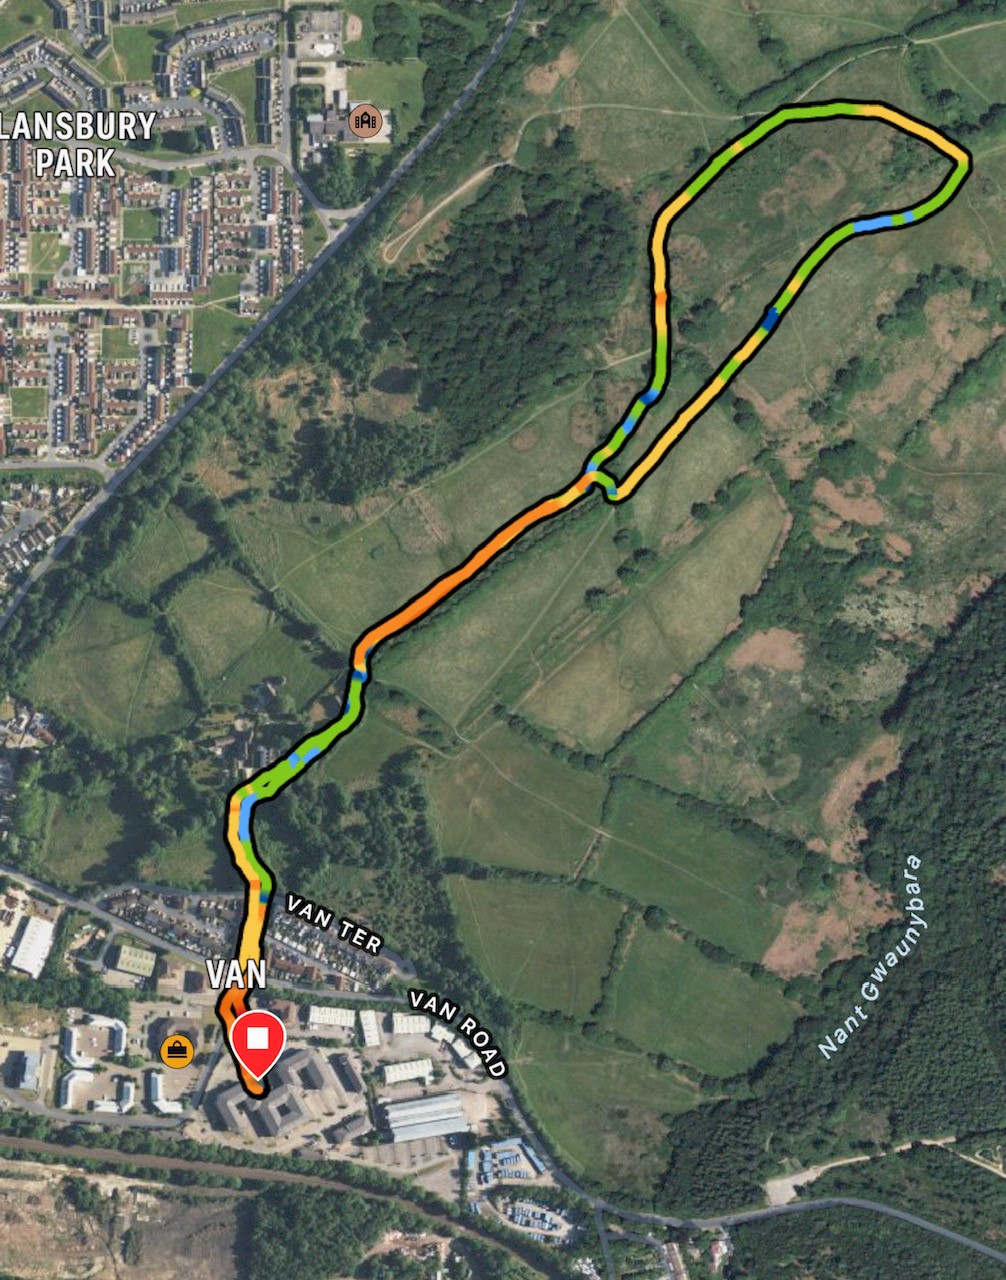 Satellite image of walk between Welsh ICE and the nearby fields.